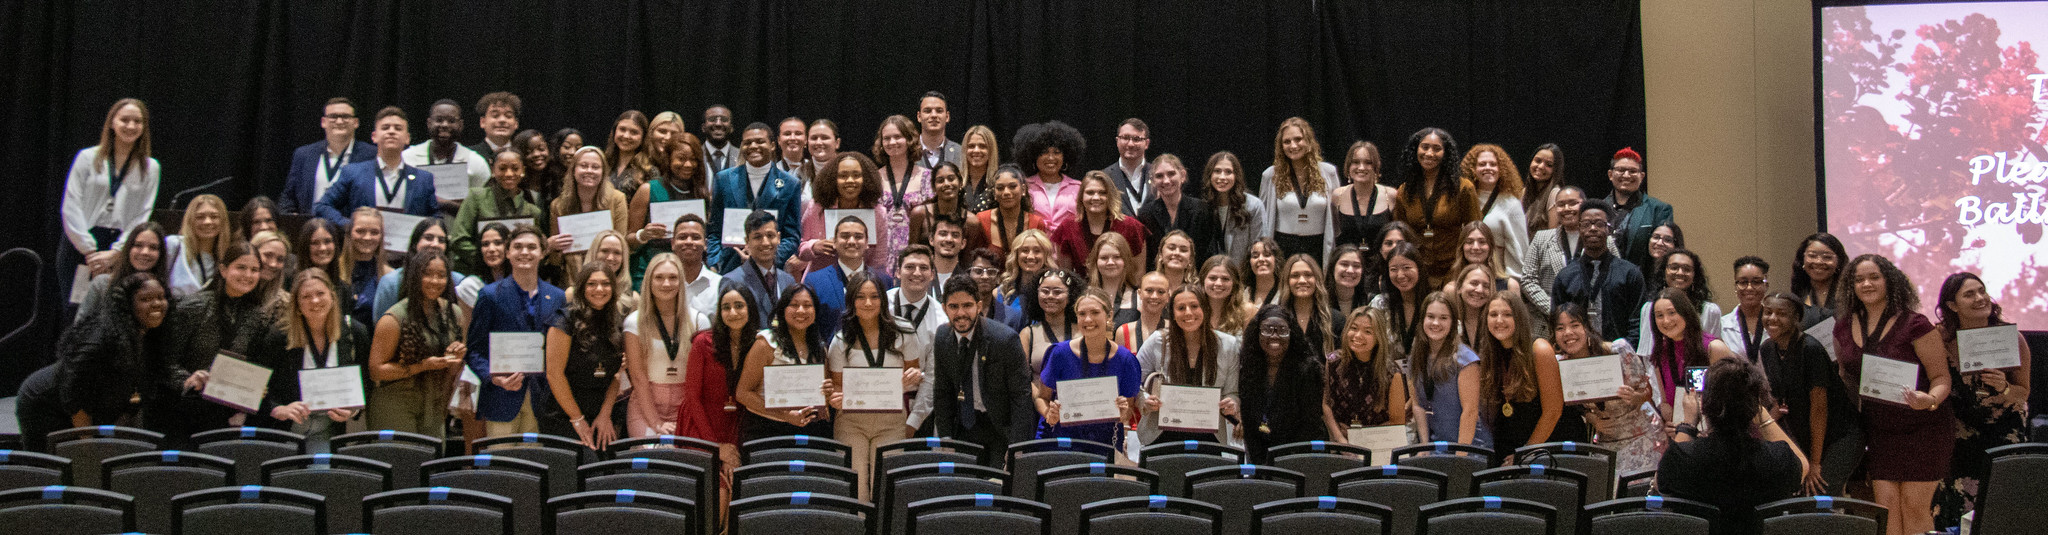 The Division of Student Affairs at Florida State University recently named the 2023 inductee class for the Torchbearer 100 program, which honors a diverse group of 100 students who have shown exceptional leadership during their collegiate careers.